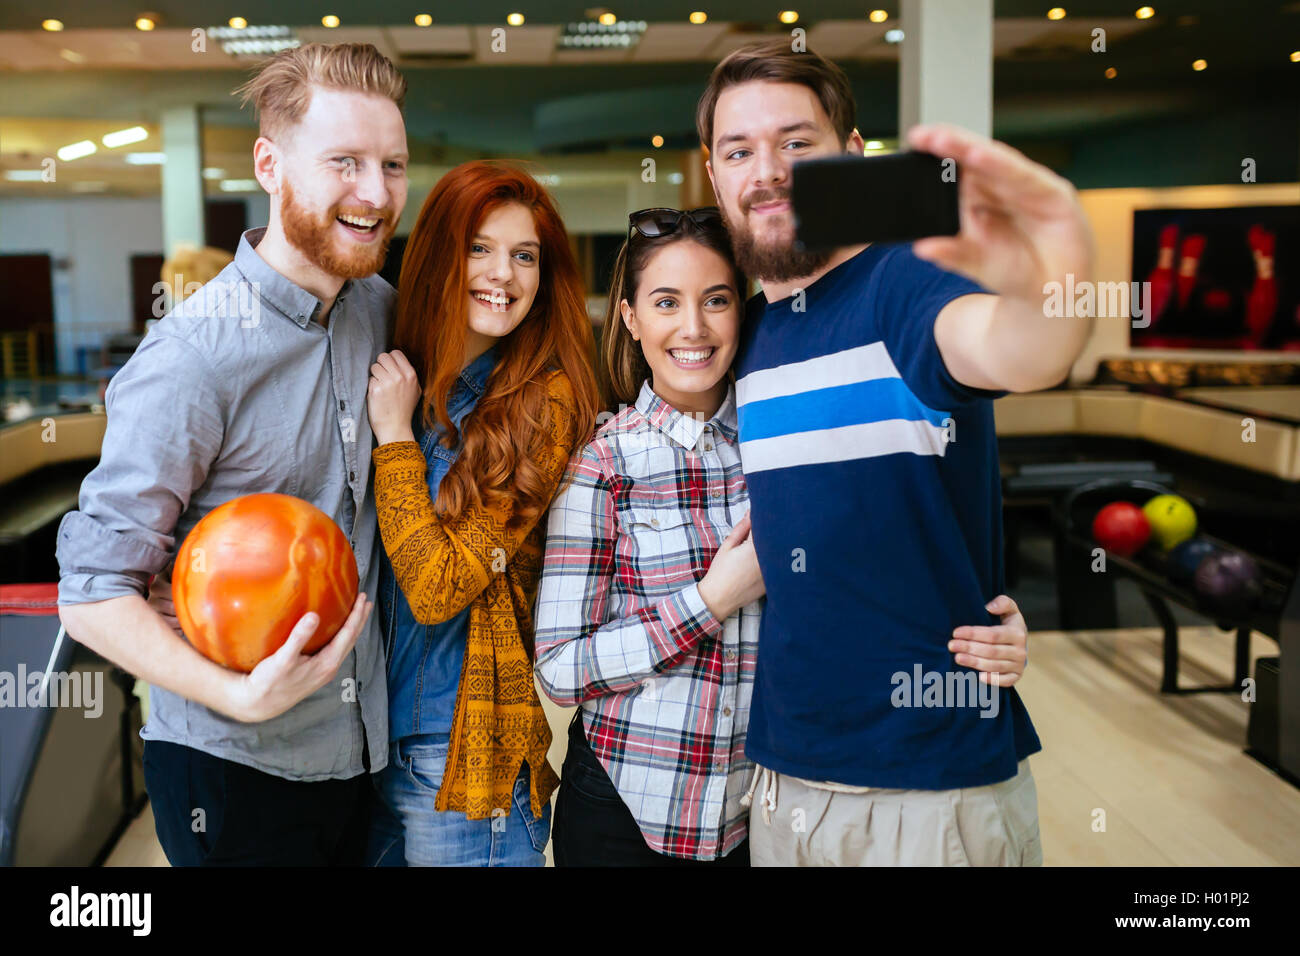 Friends taking selfies of themselves bowling Stock Photo